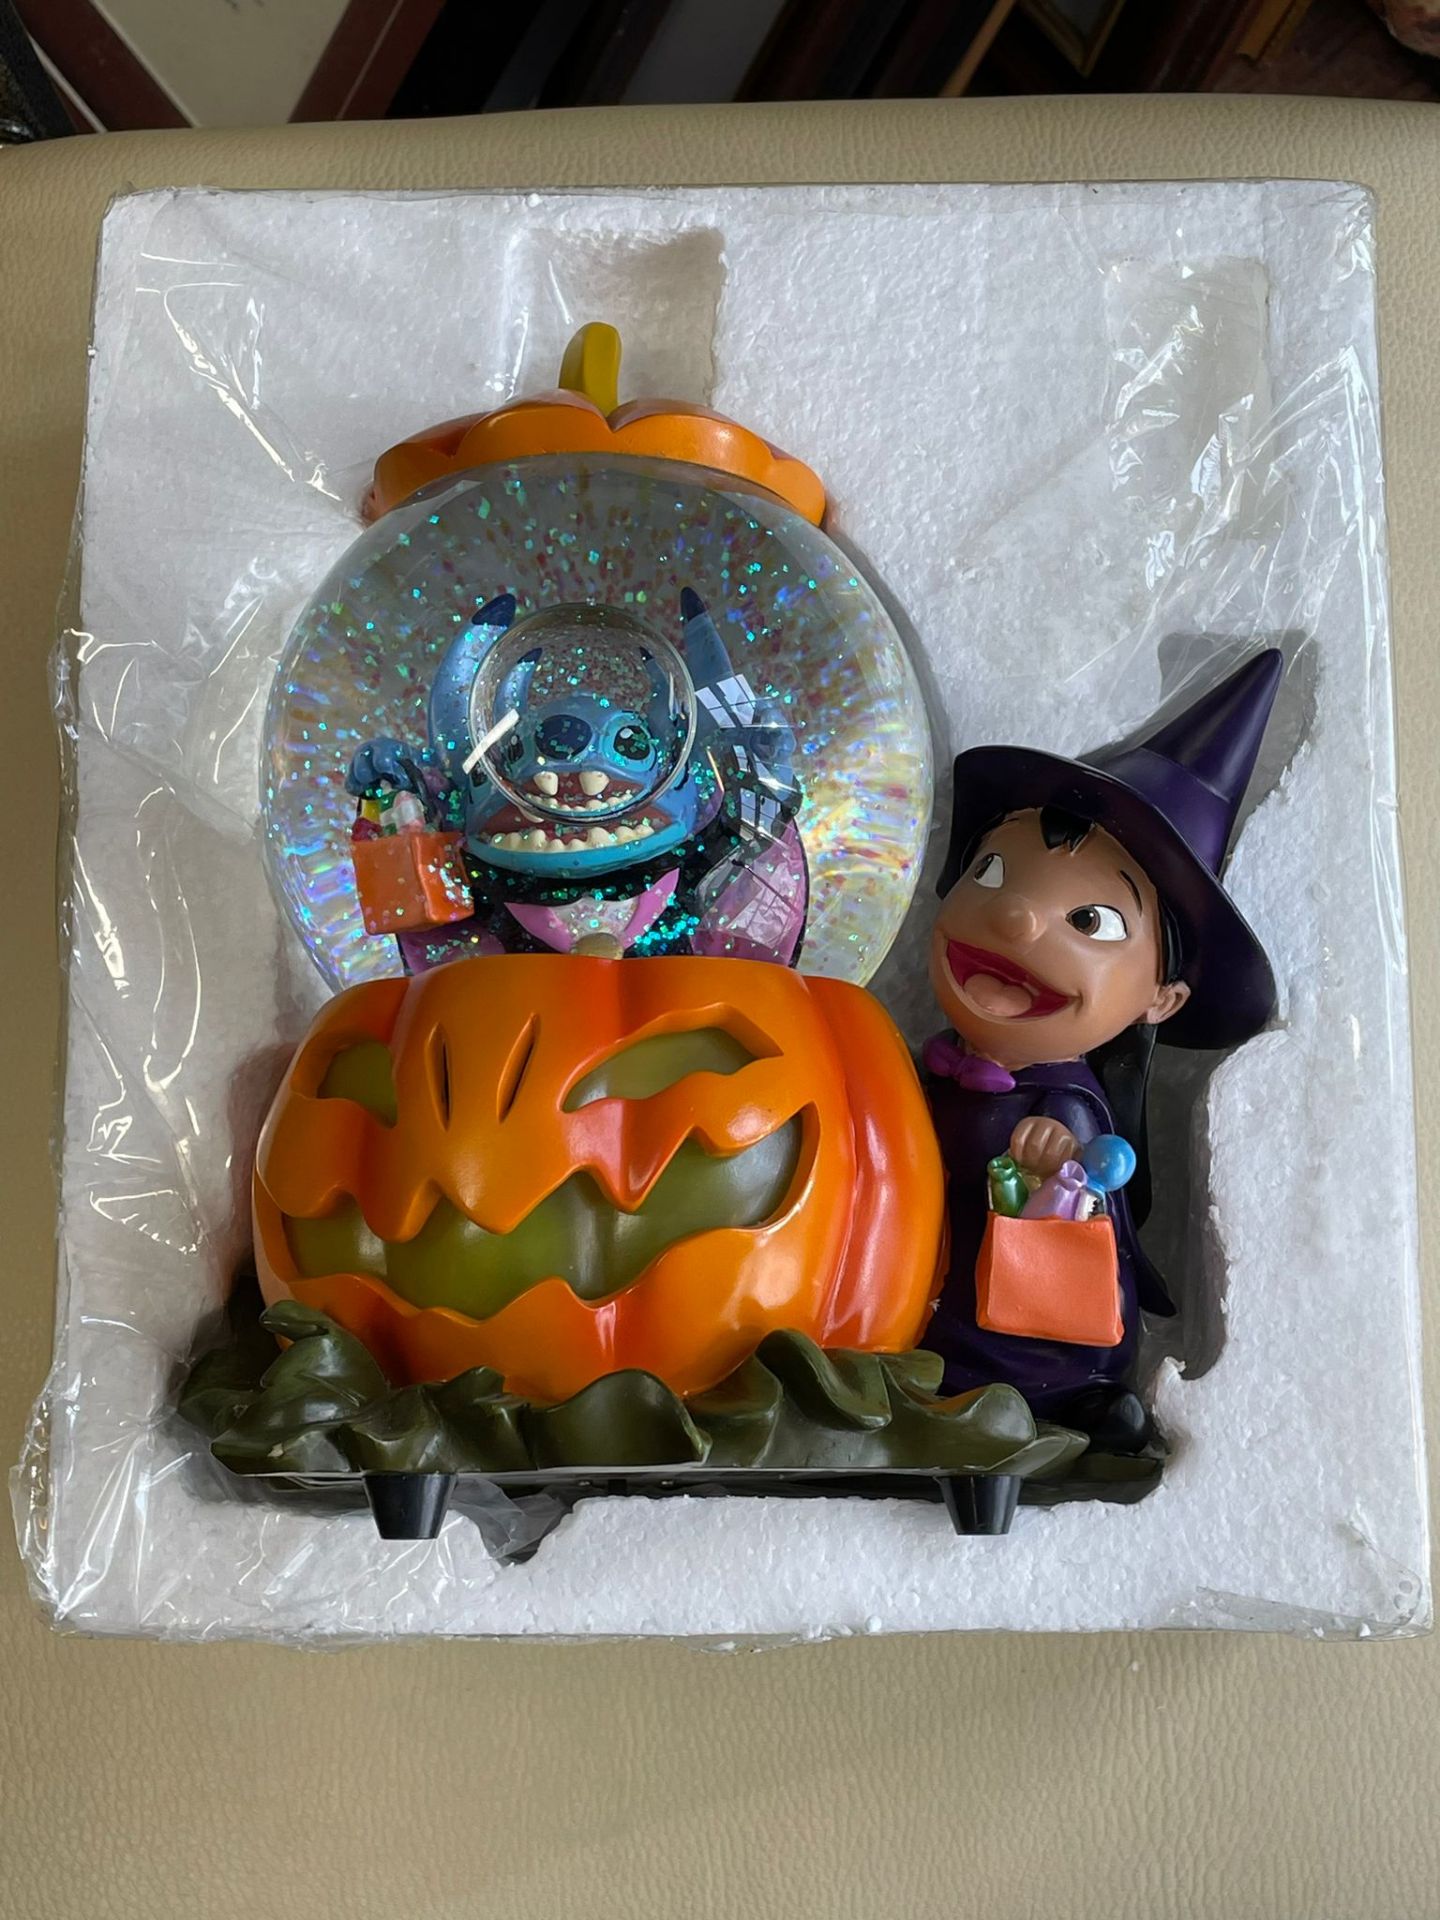 'DISNEY' Lilo and Stitch limited edition of 350 snow globes - Image 4 of 5